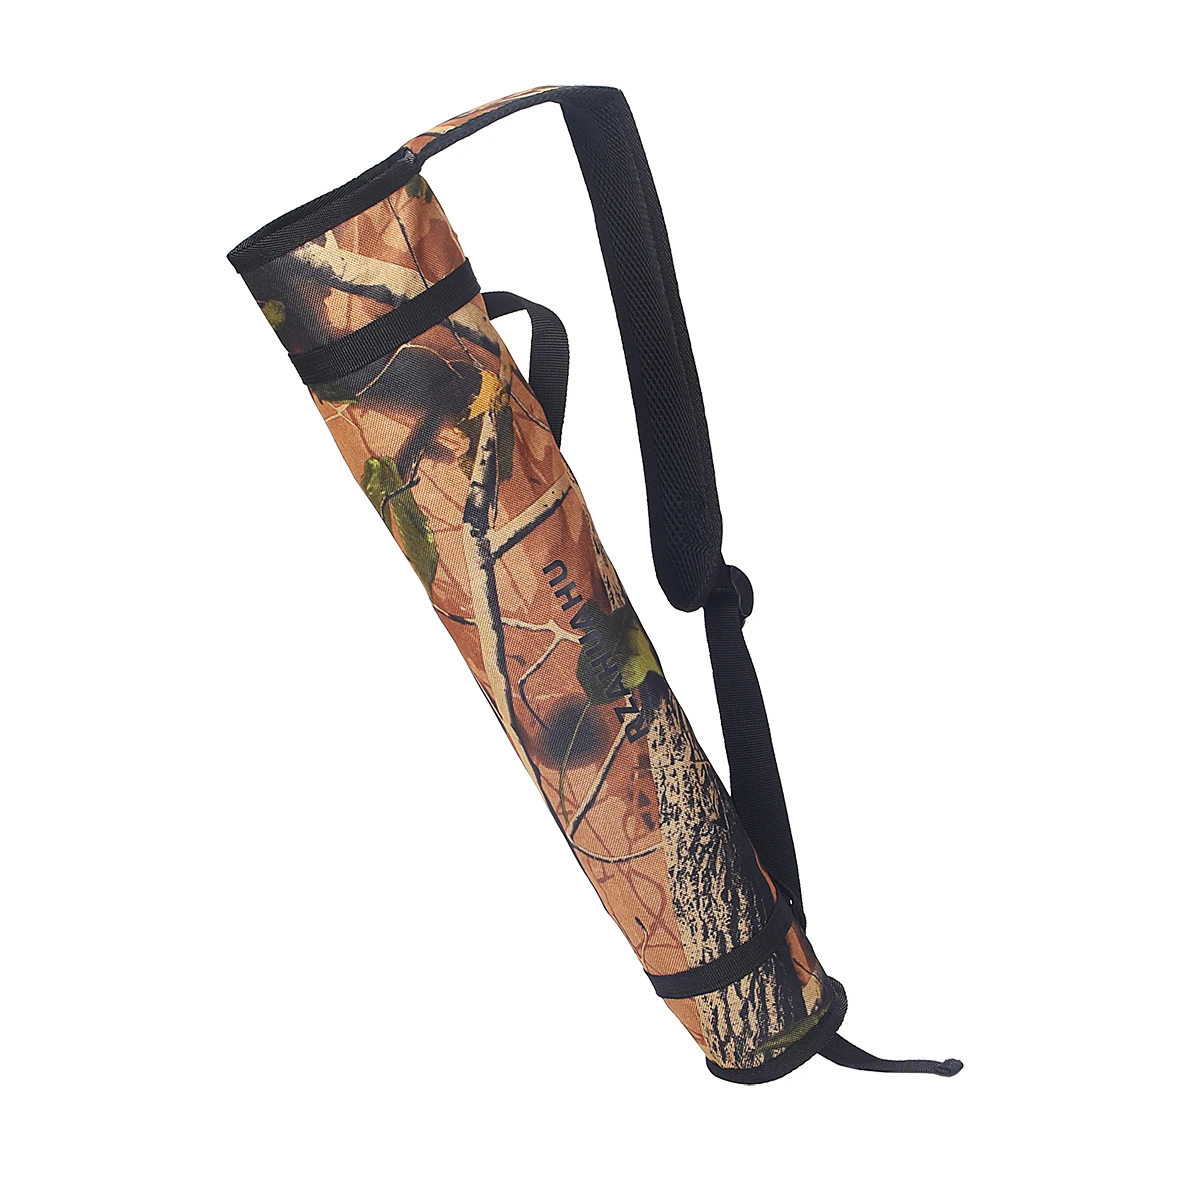 

Archery Lightweight Back Arrow Quiver Dual Use Foldable Compact Hip Arrows Bag with Molle System Hanged for Target Shooting